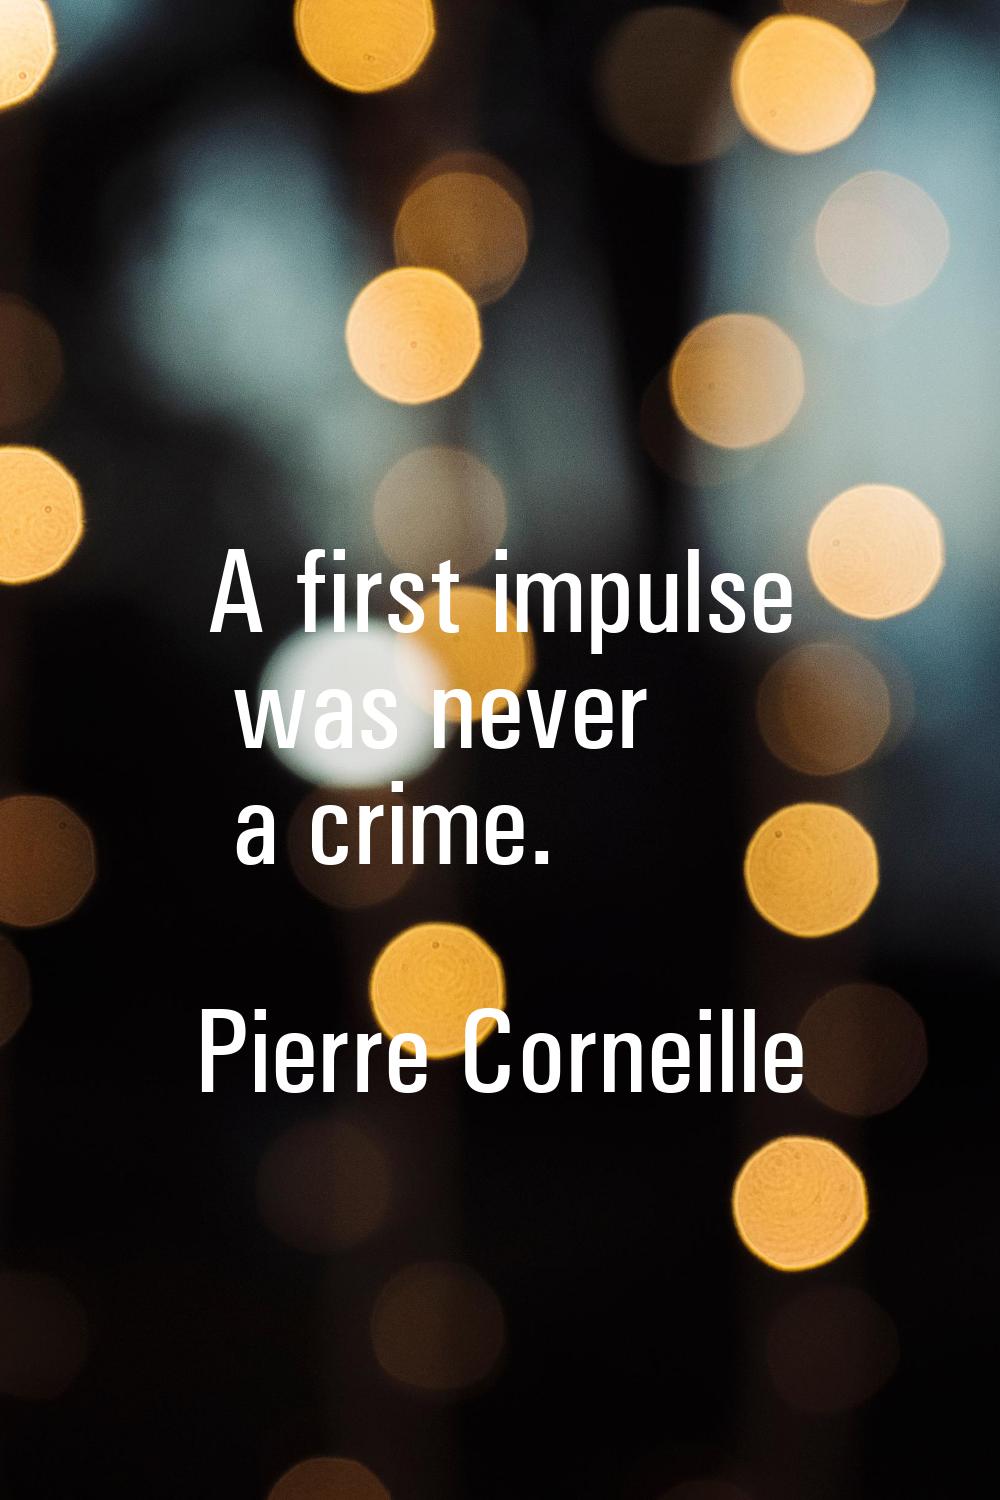 A first impulse was never a crime.